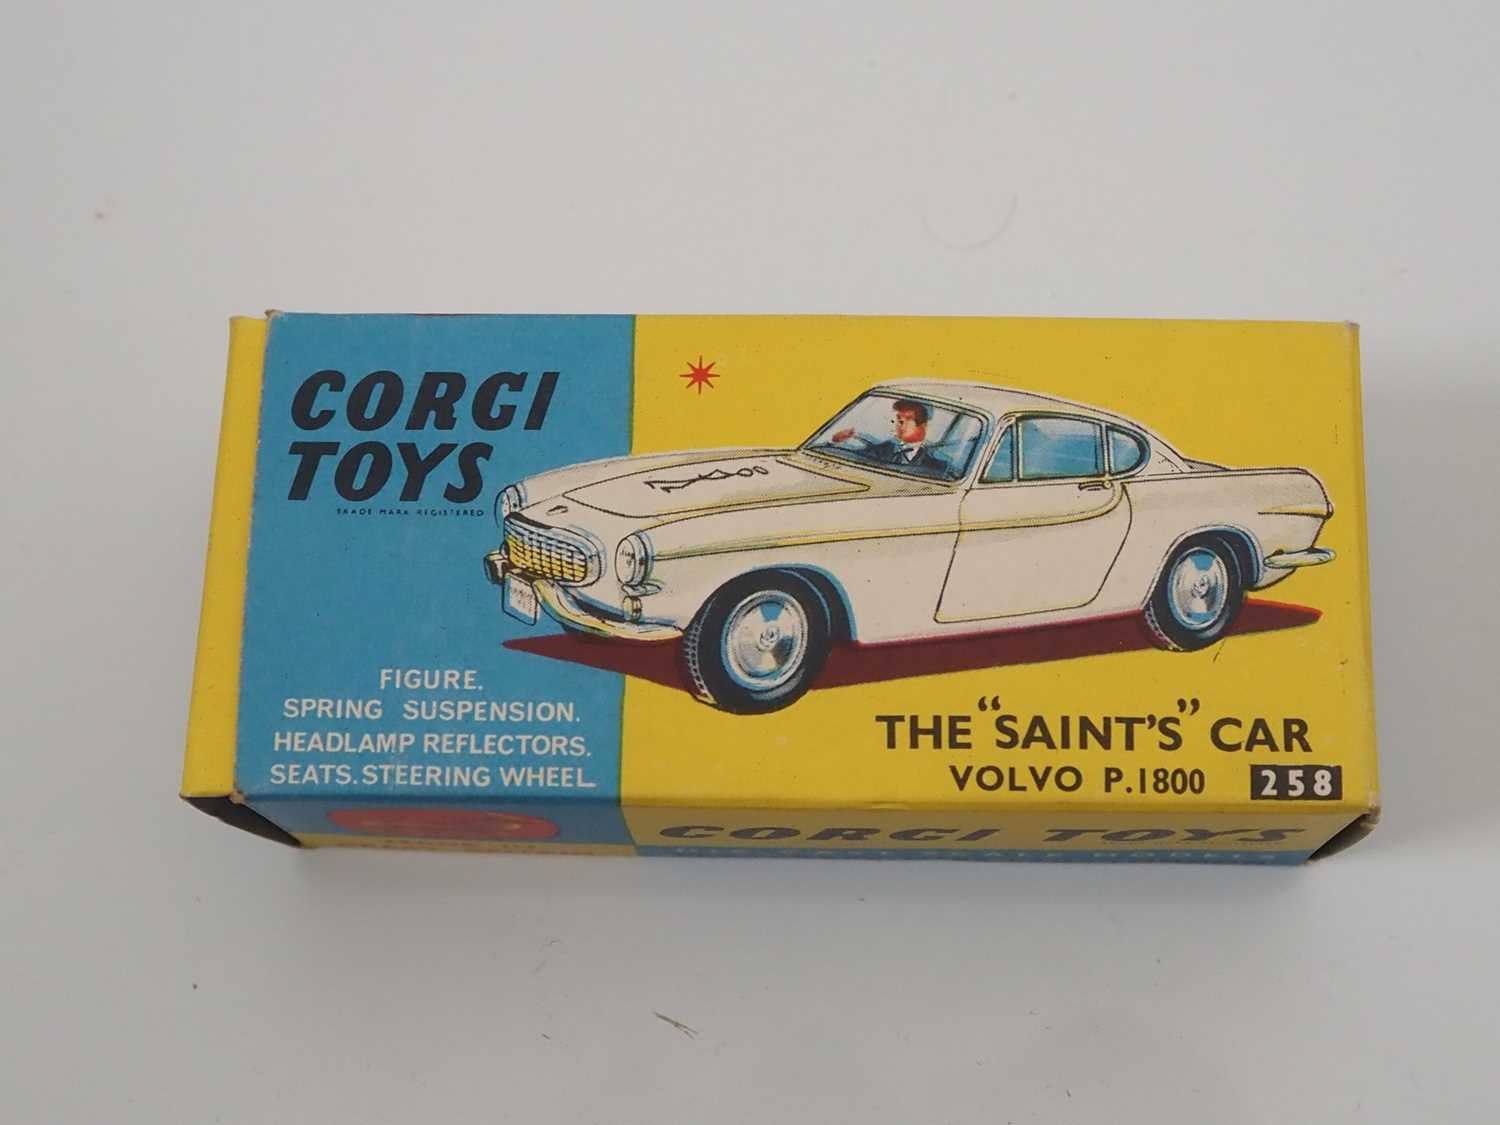 A CORGI 258 diecast 'The Saint's' Volvo P1800 with white body, red interior with figure, silver - Image 4 of 5